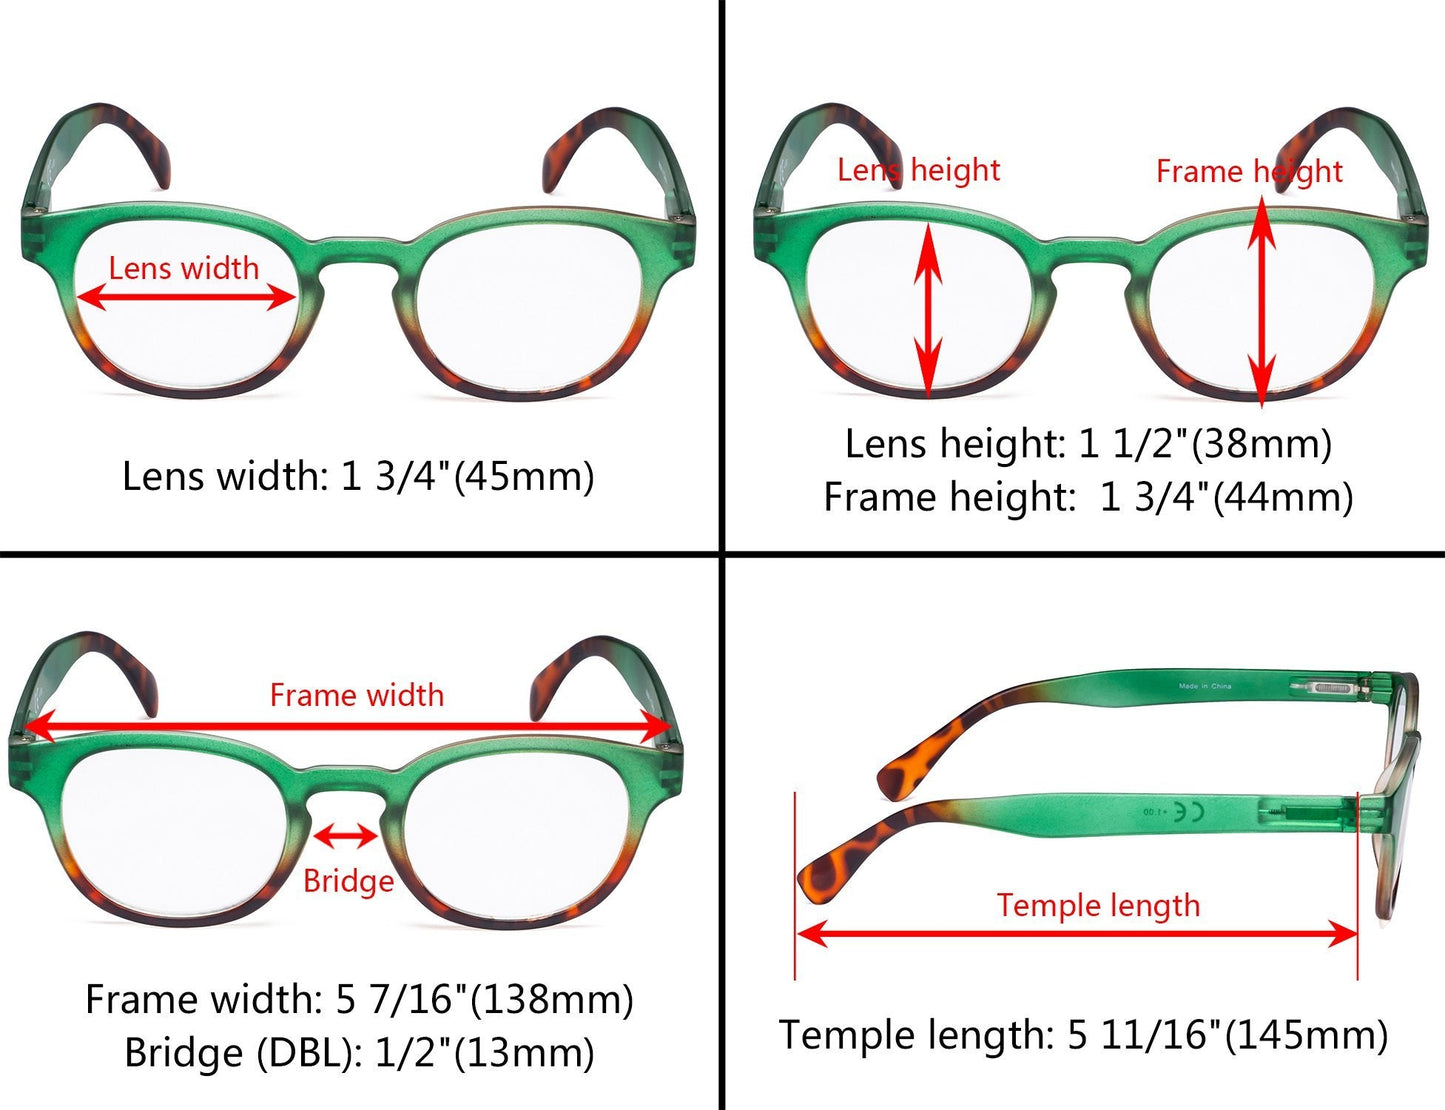 4 Pack Fashion Oval Colorful Reading Glasses R124D